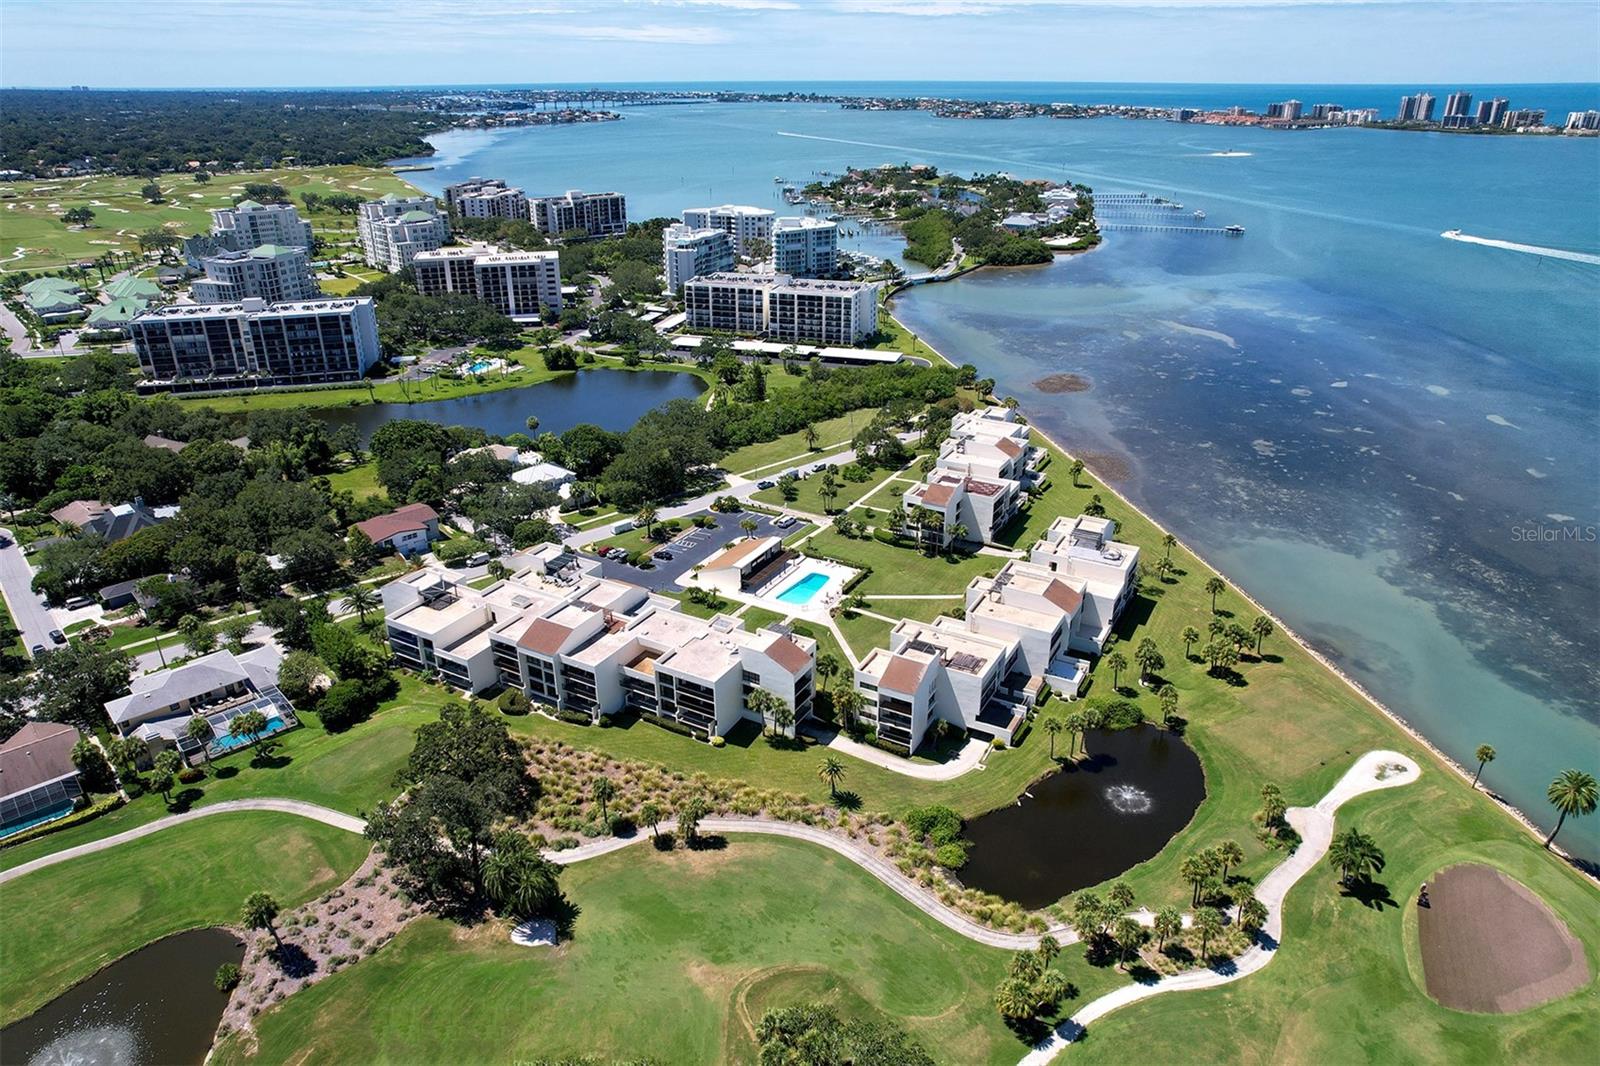 Aerial view from the golf course looking SW at the community into the Harbor